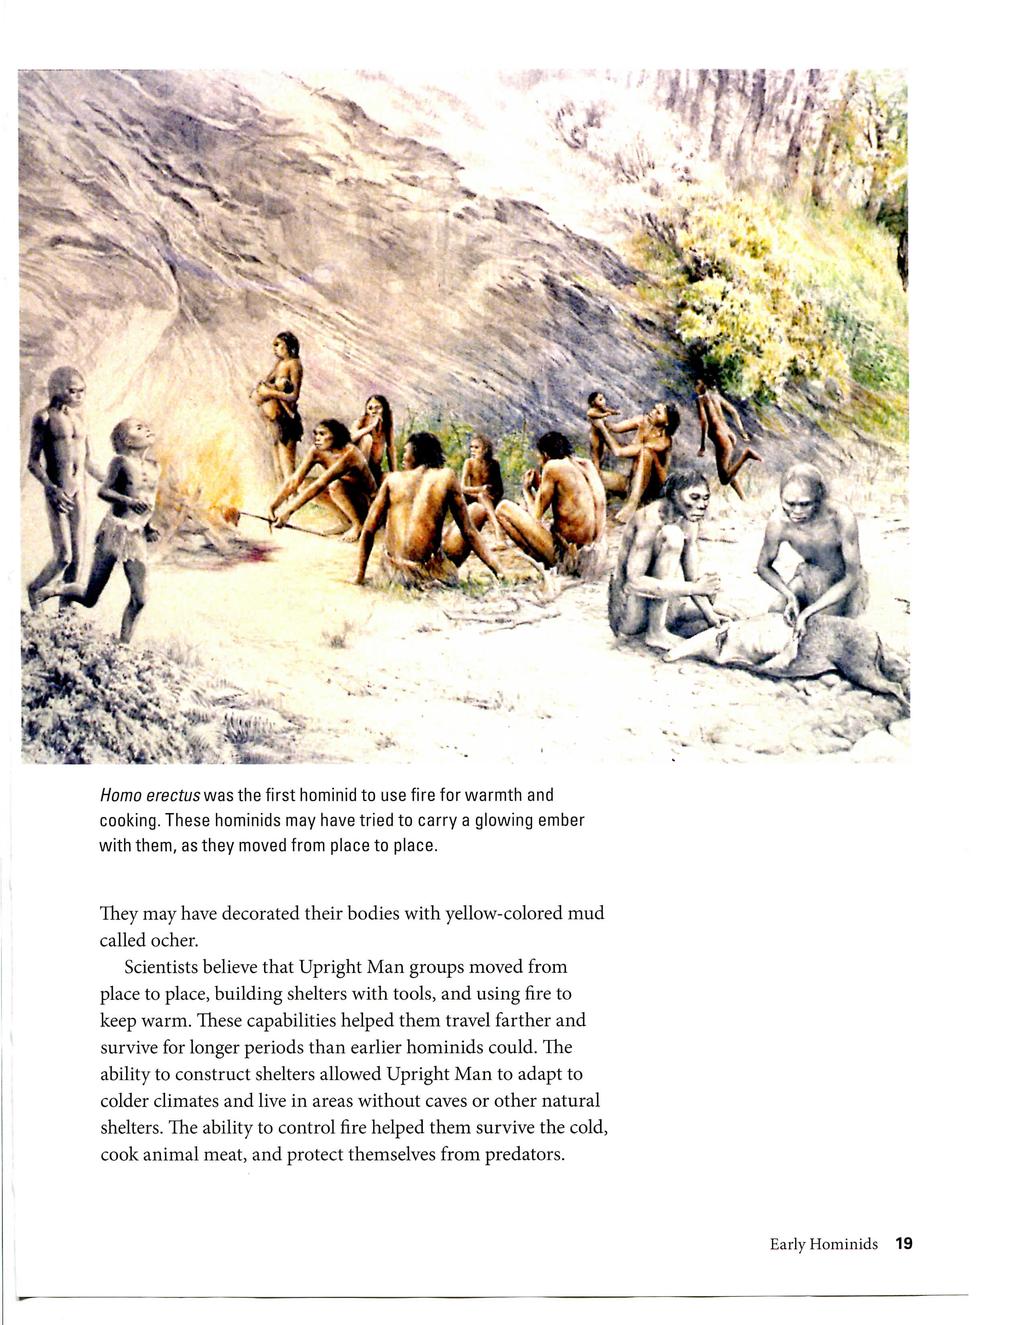 Homo erectus was the first hominid to use fire for warmth and cooking. These hominids may have tried to carry a glowing ember with them, as they moved from place to place.